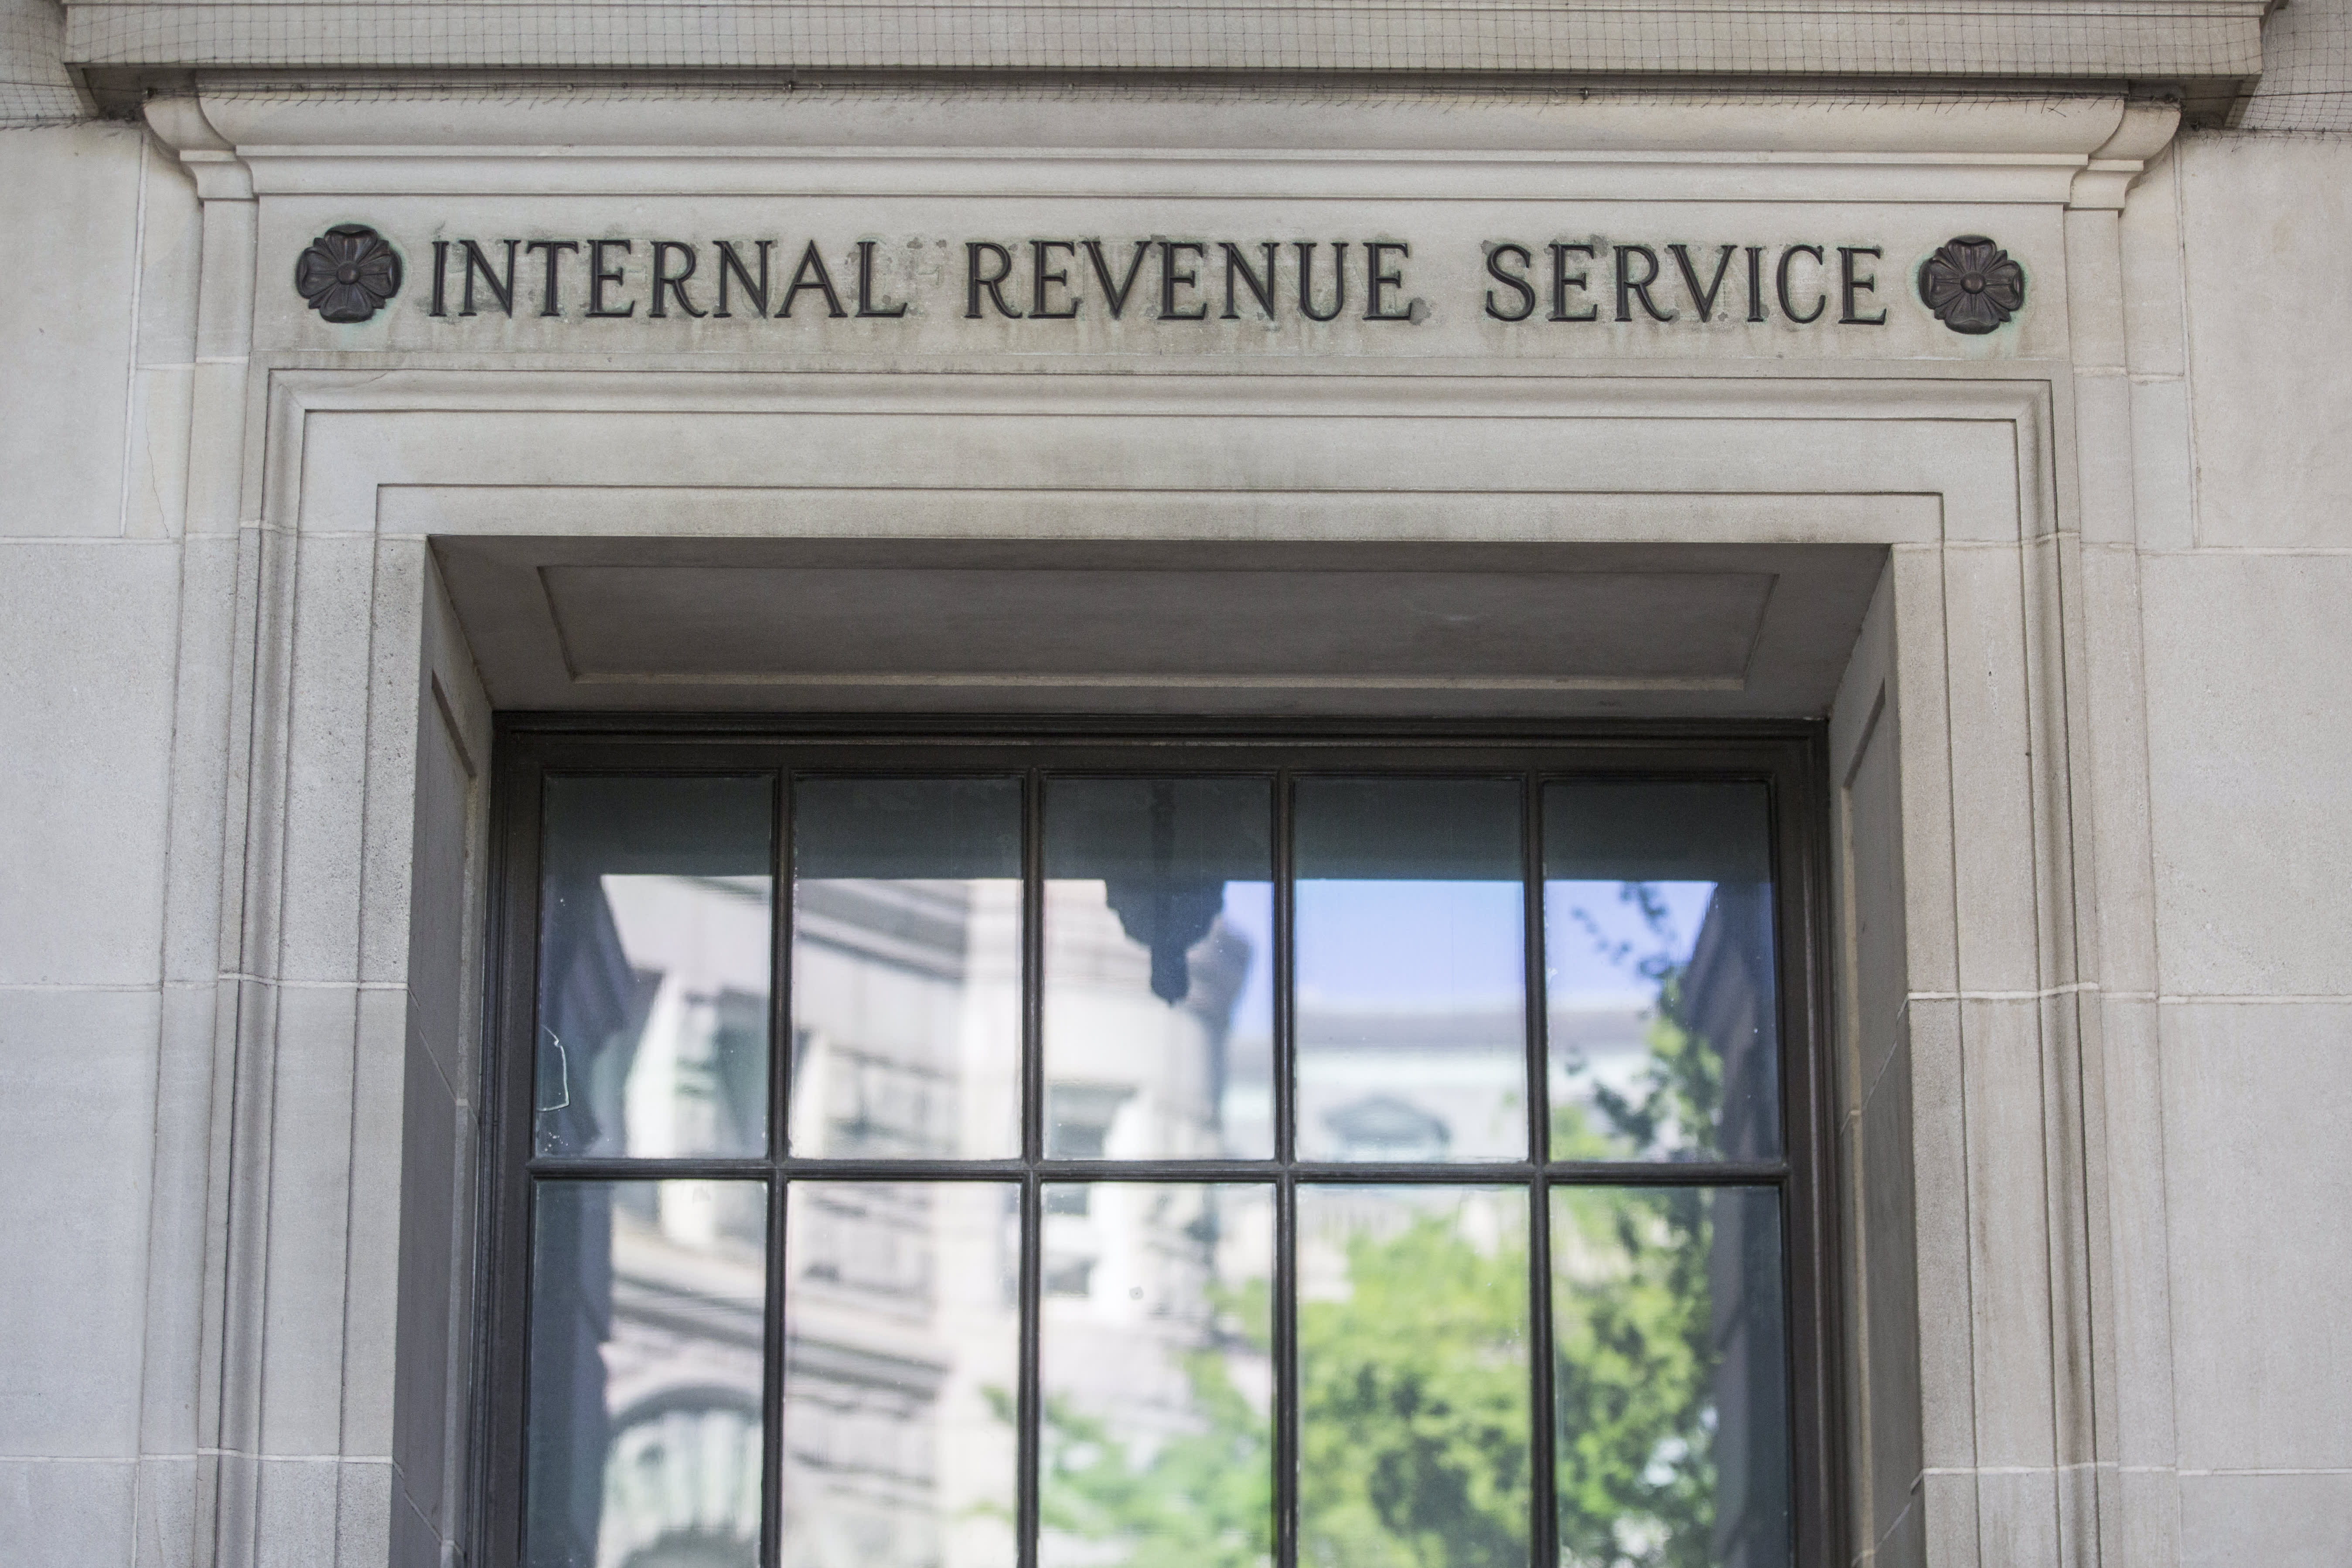 IRS had a backlog of nearly 8 million paper business tax returns in 2020 due to pandemic